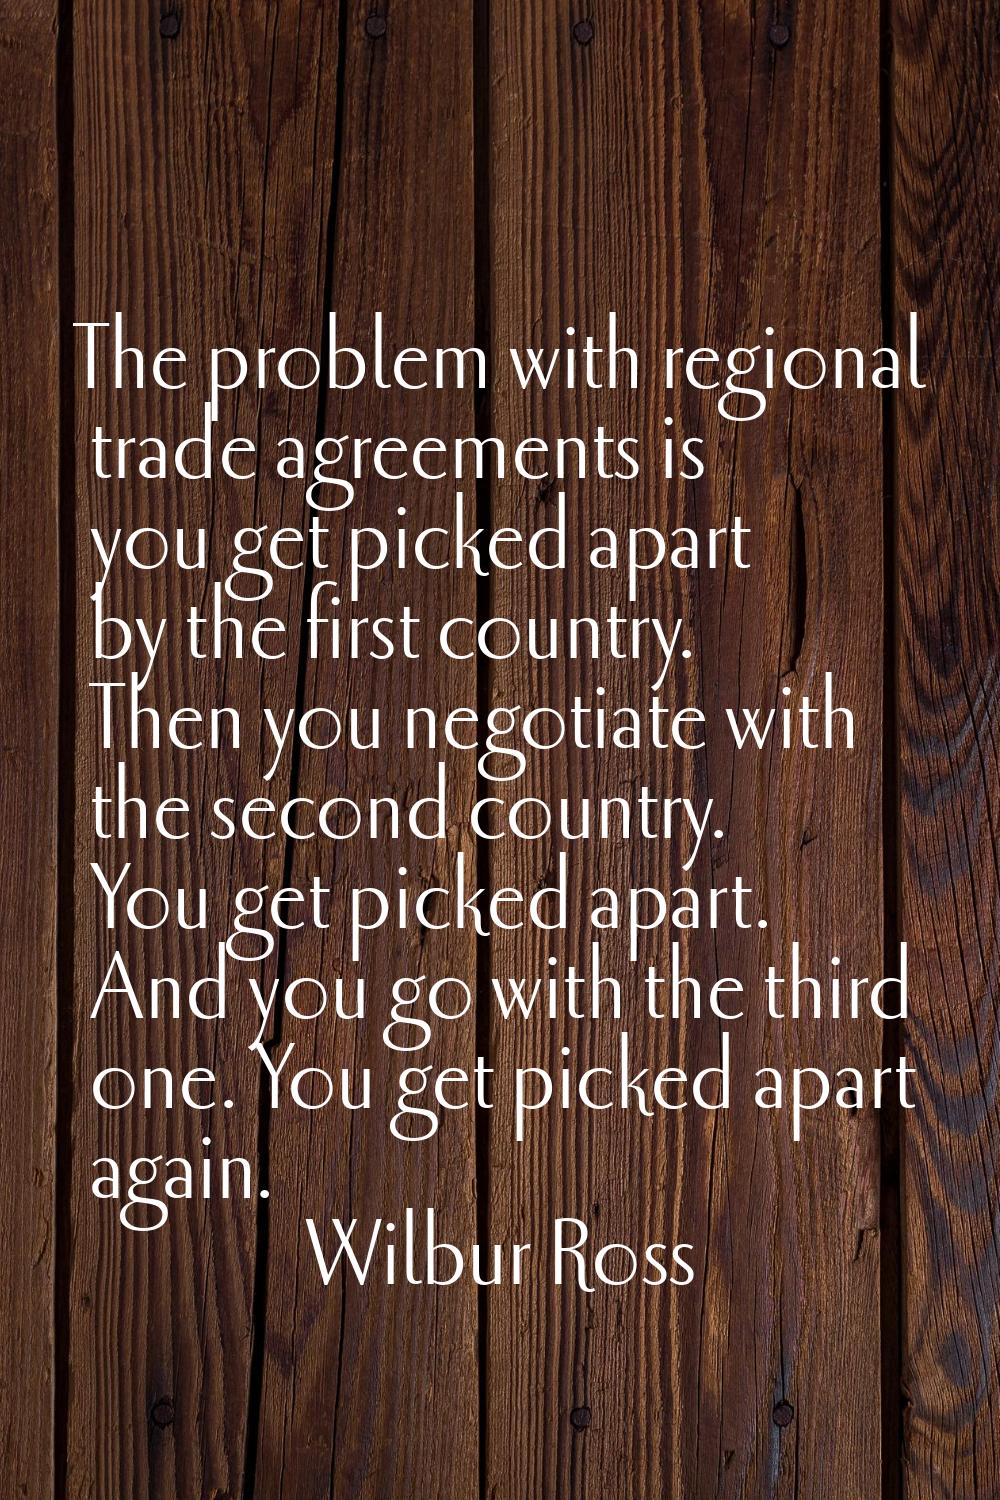 The problem with regional trade agreements is you get picked apart by the first country. Then you n